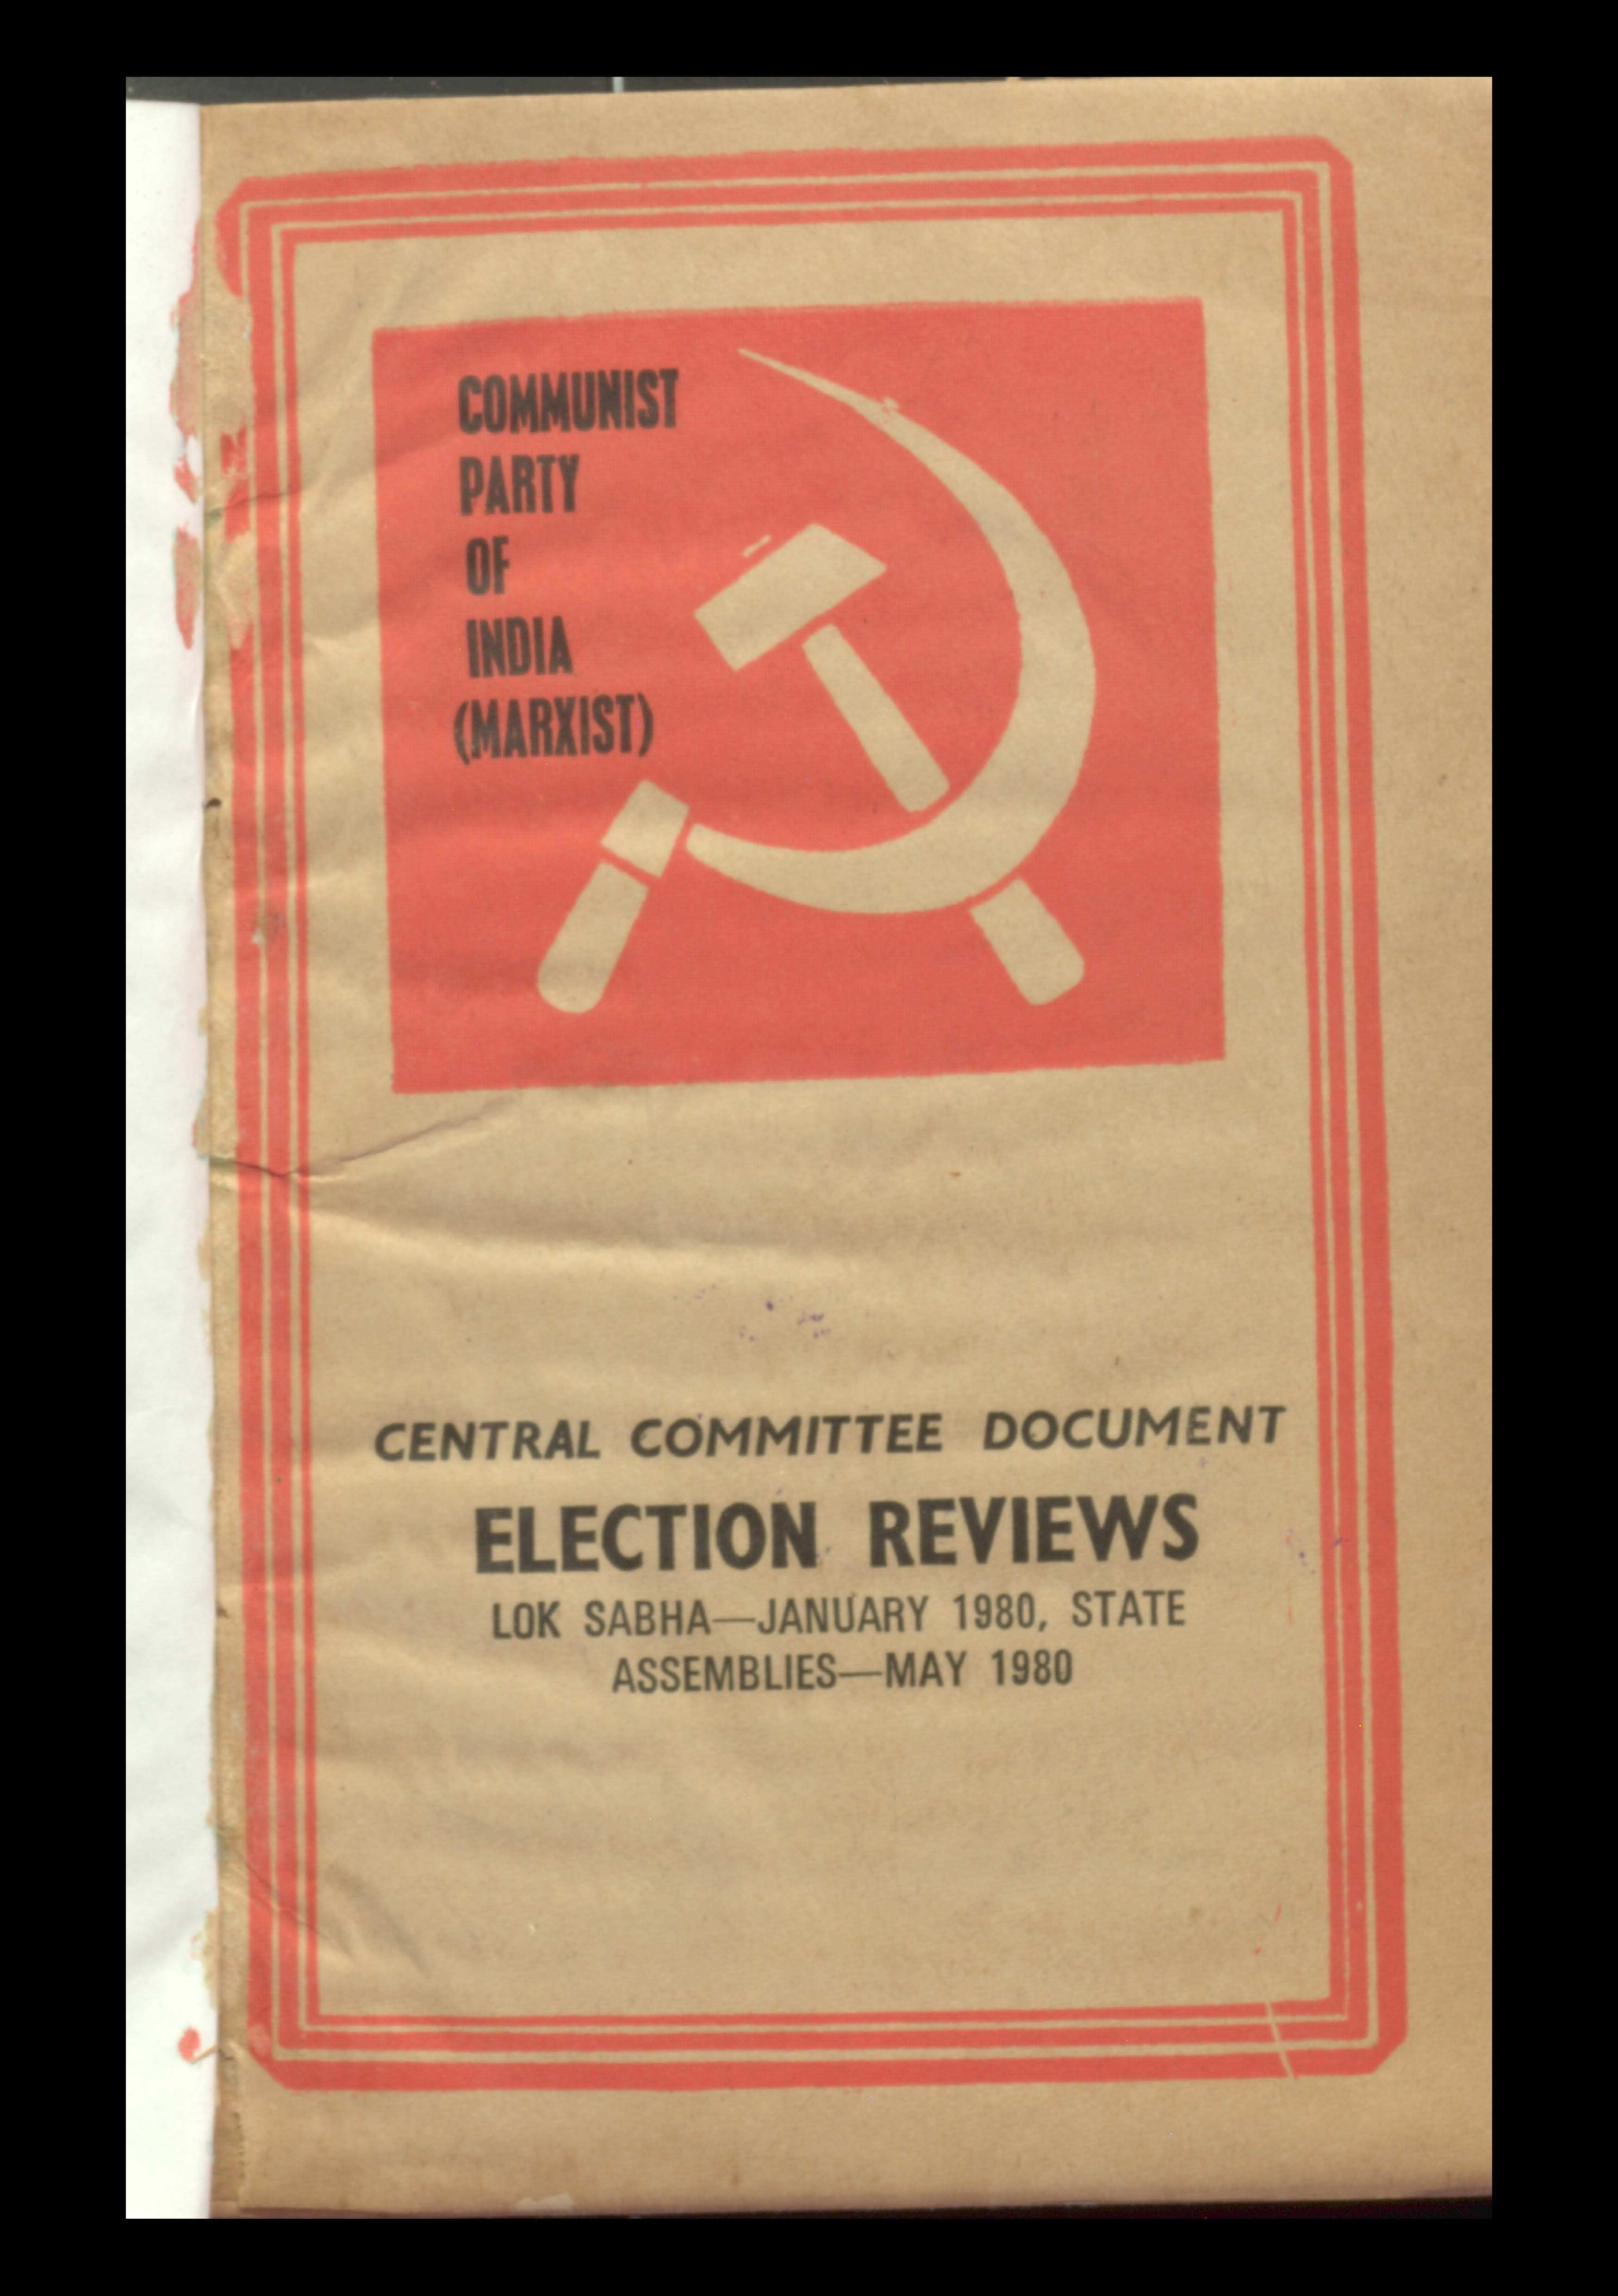 Communist party of india (marxist) central committee document election reviews